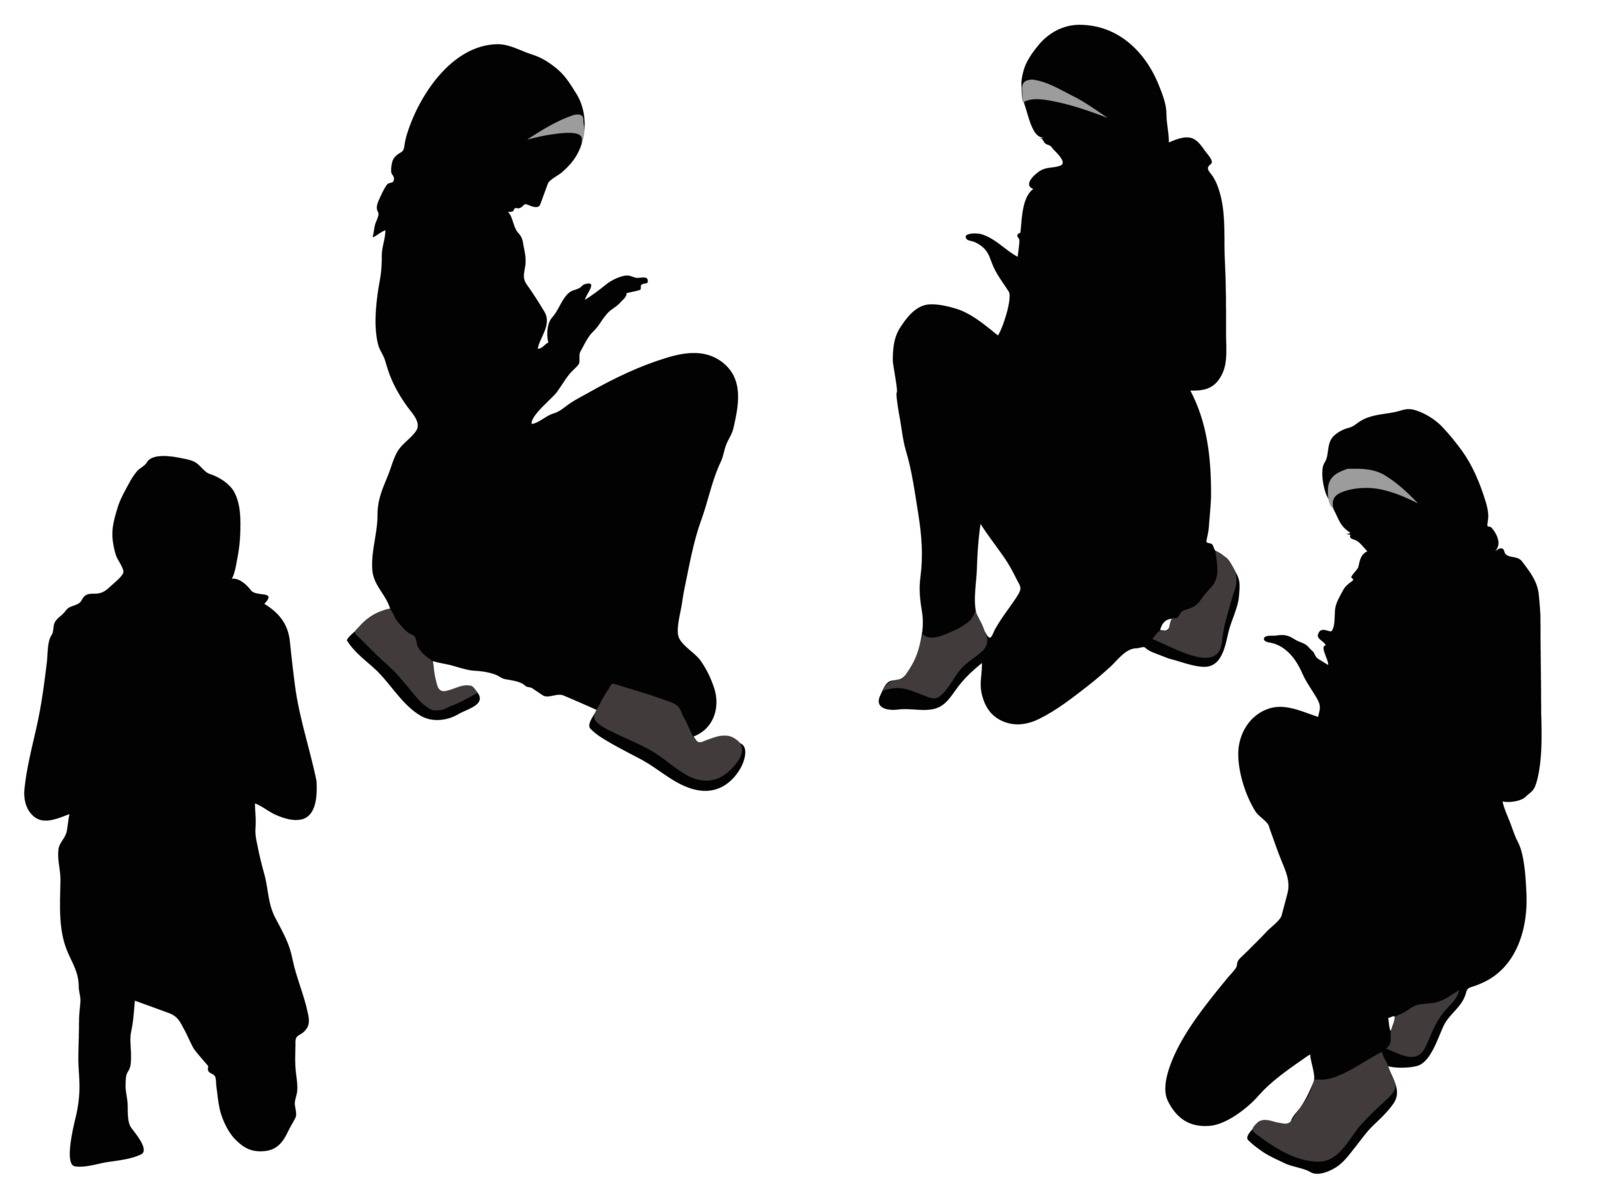 Muslim woman silhouette in pray pose by Istanbul2009